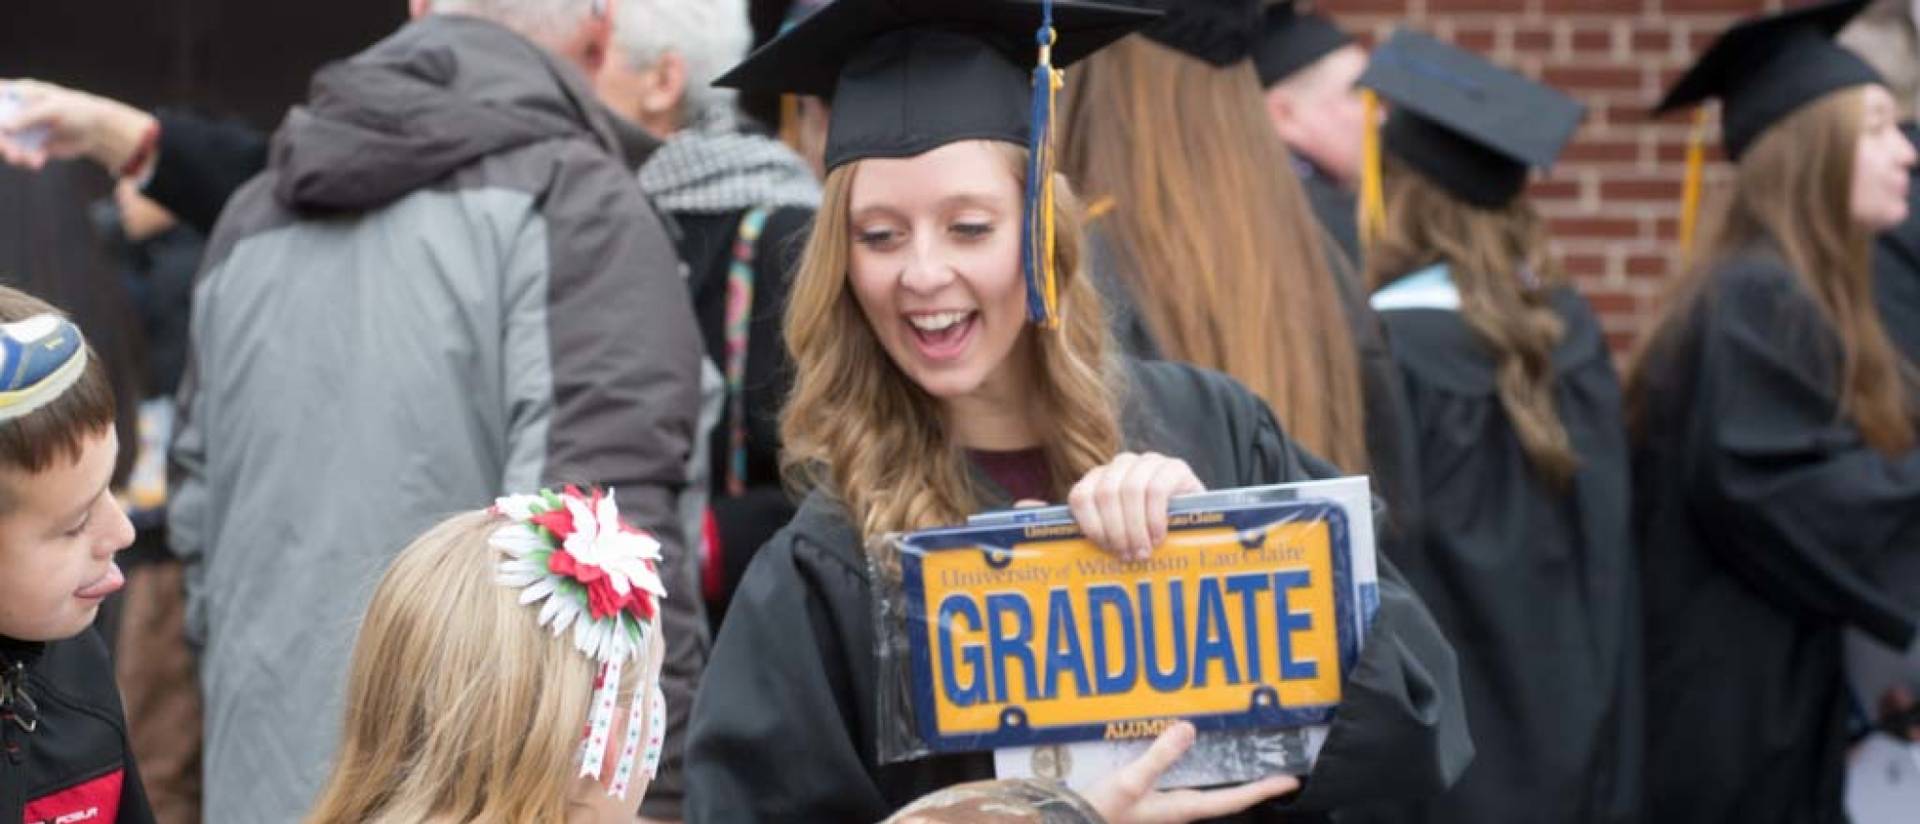 Student outside at commencement holding license plate that says “graduate”